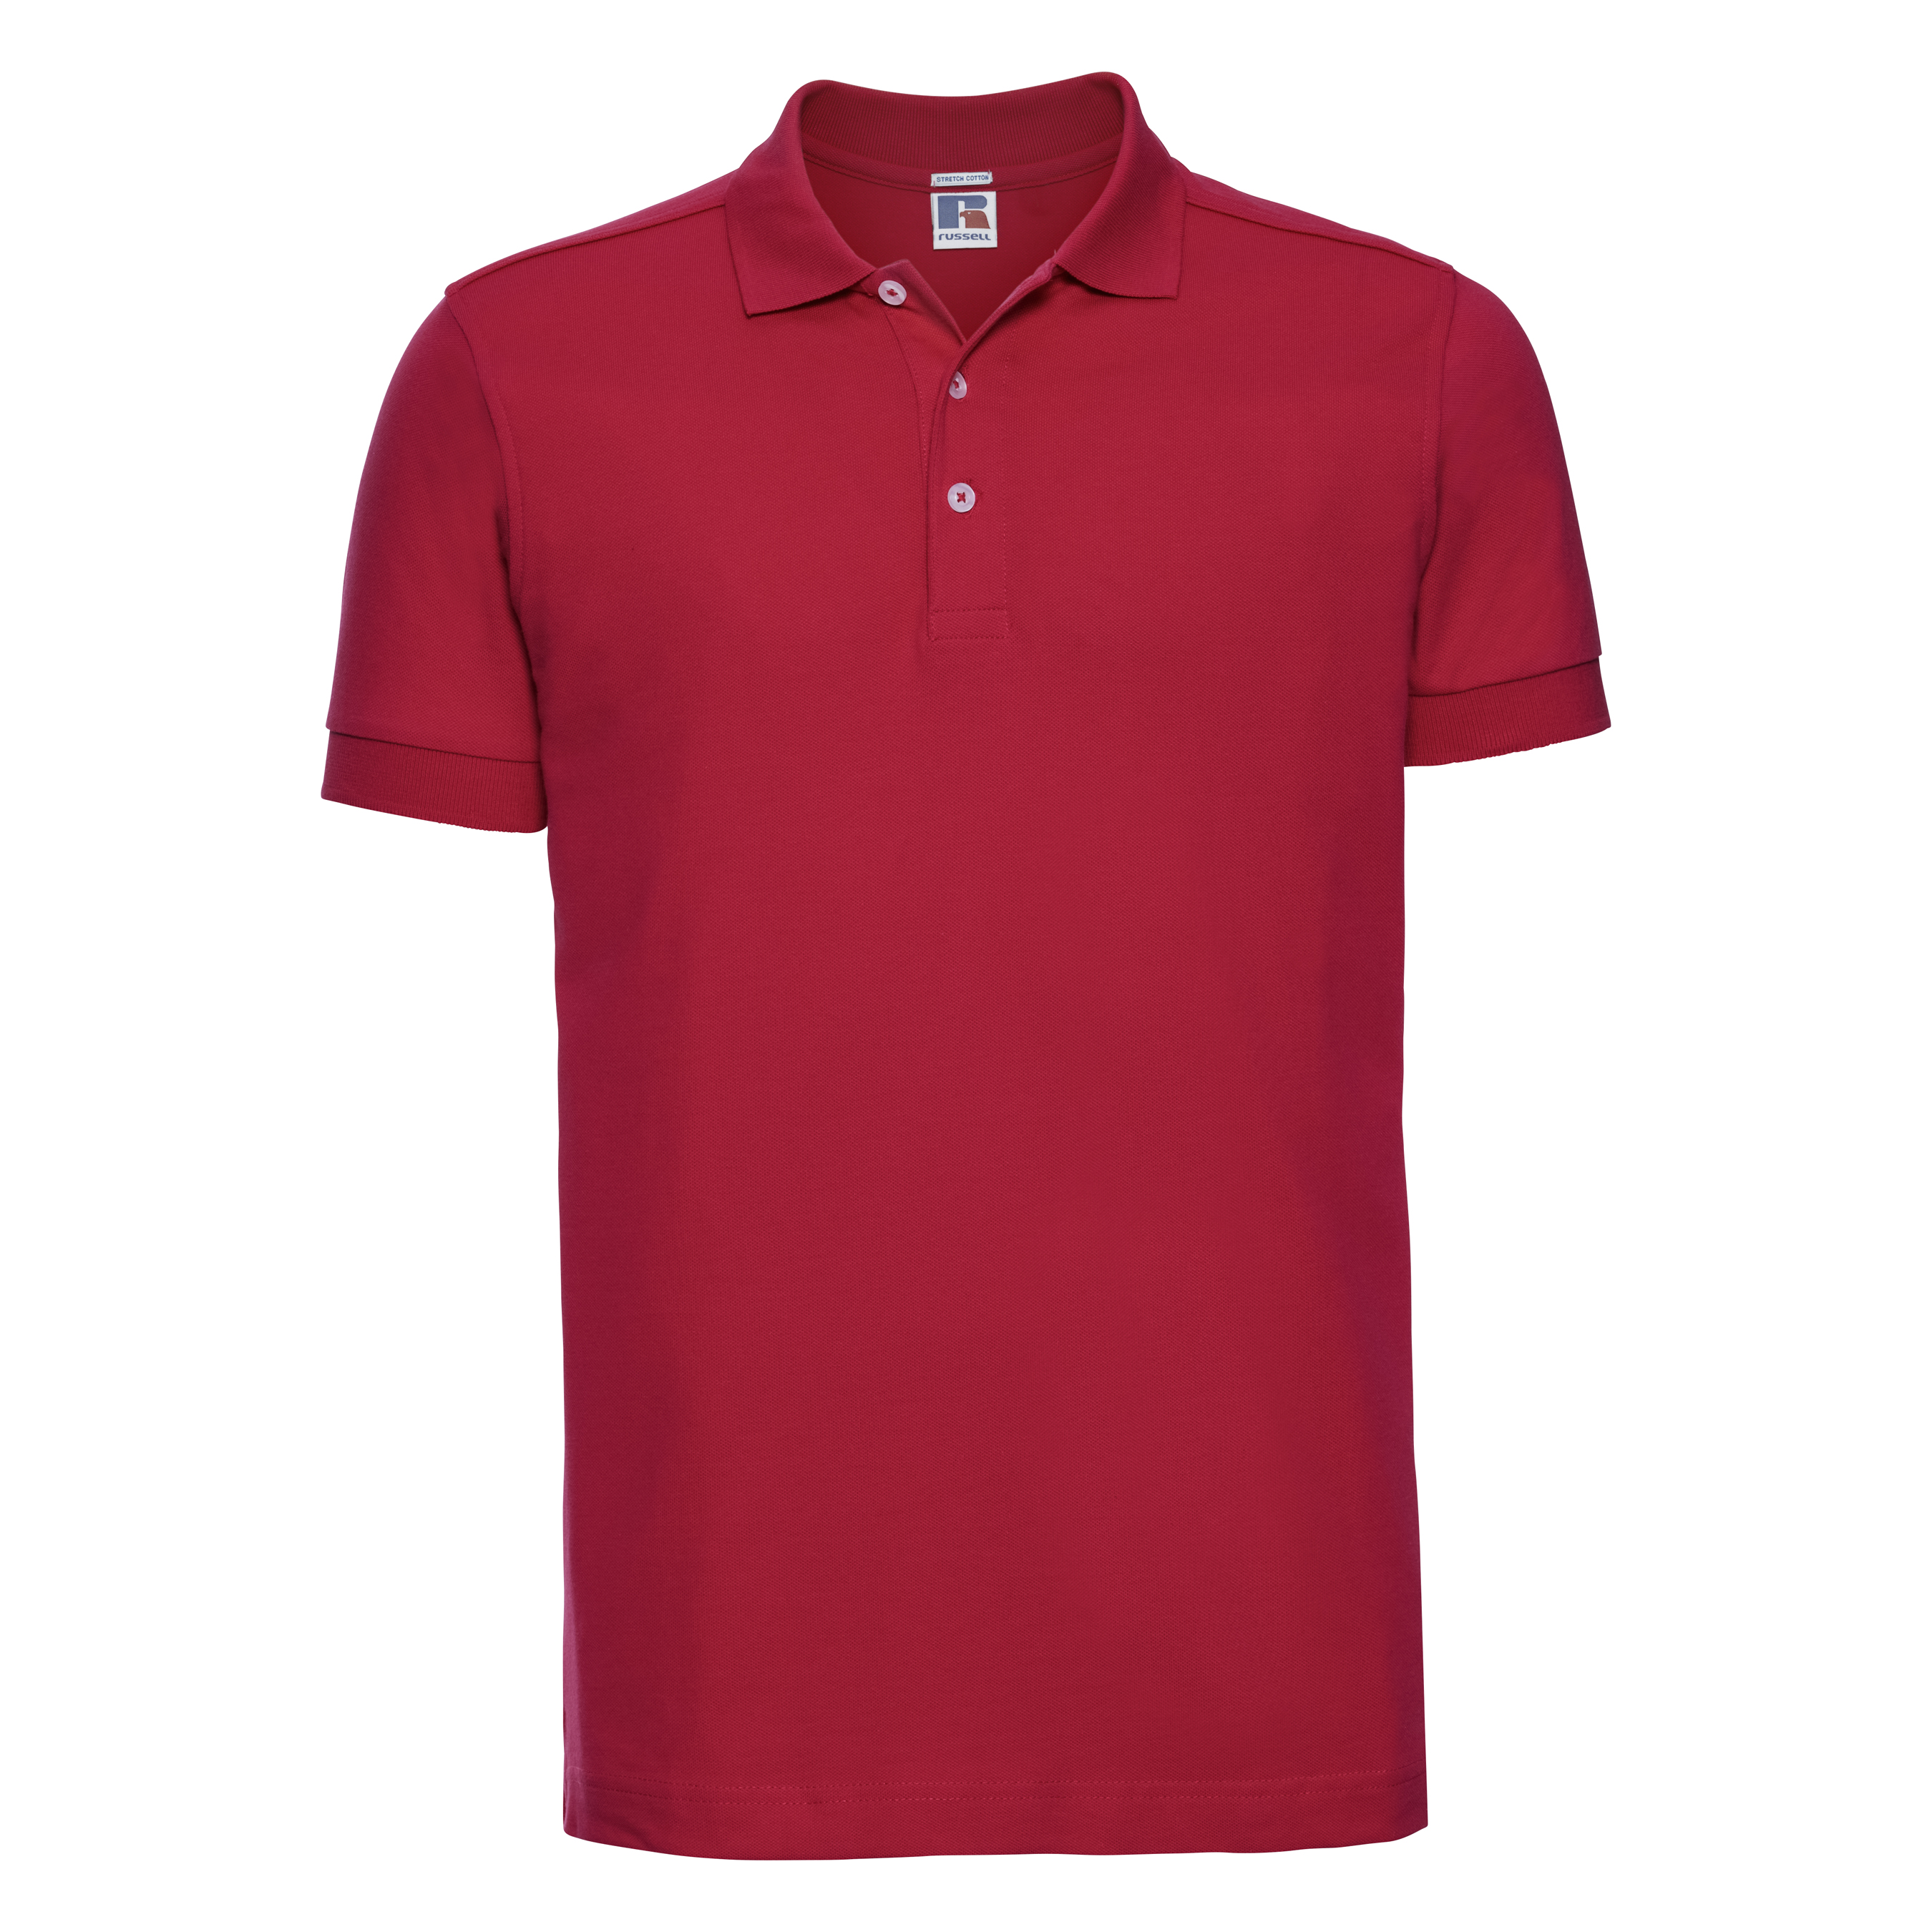 ax-httpswebsystems.s3.amazonaws.comtmp_for_downloadrussell-stretch-polo-classic-red.jpg